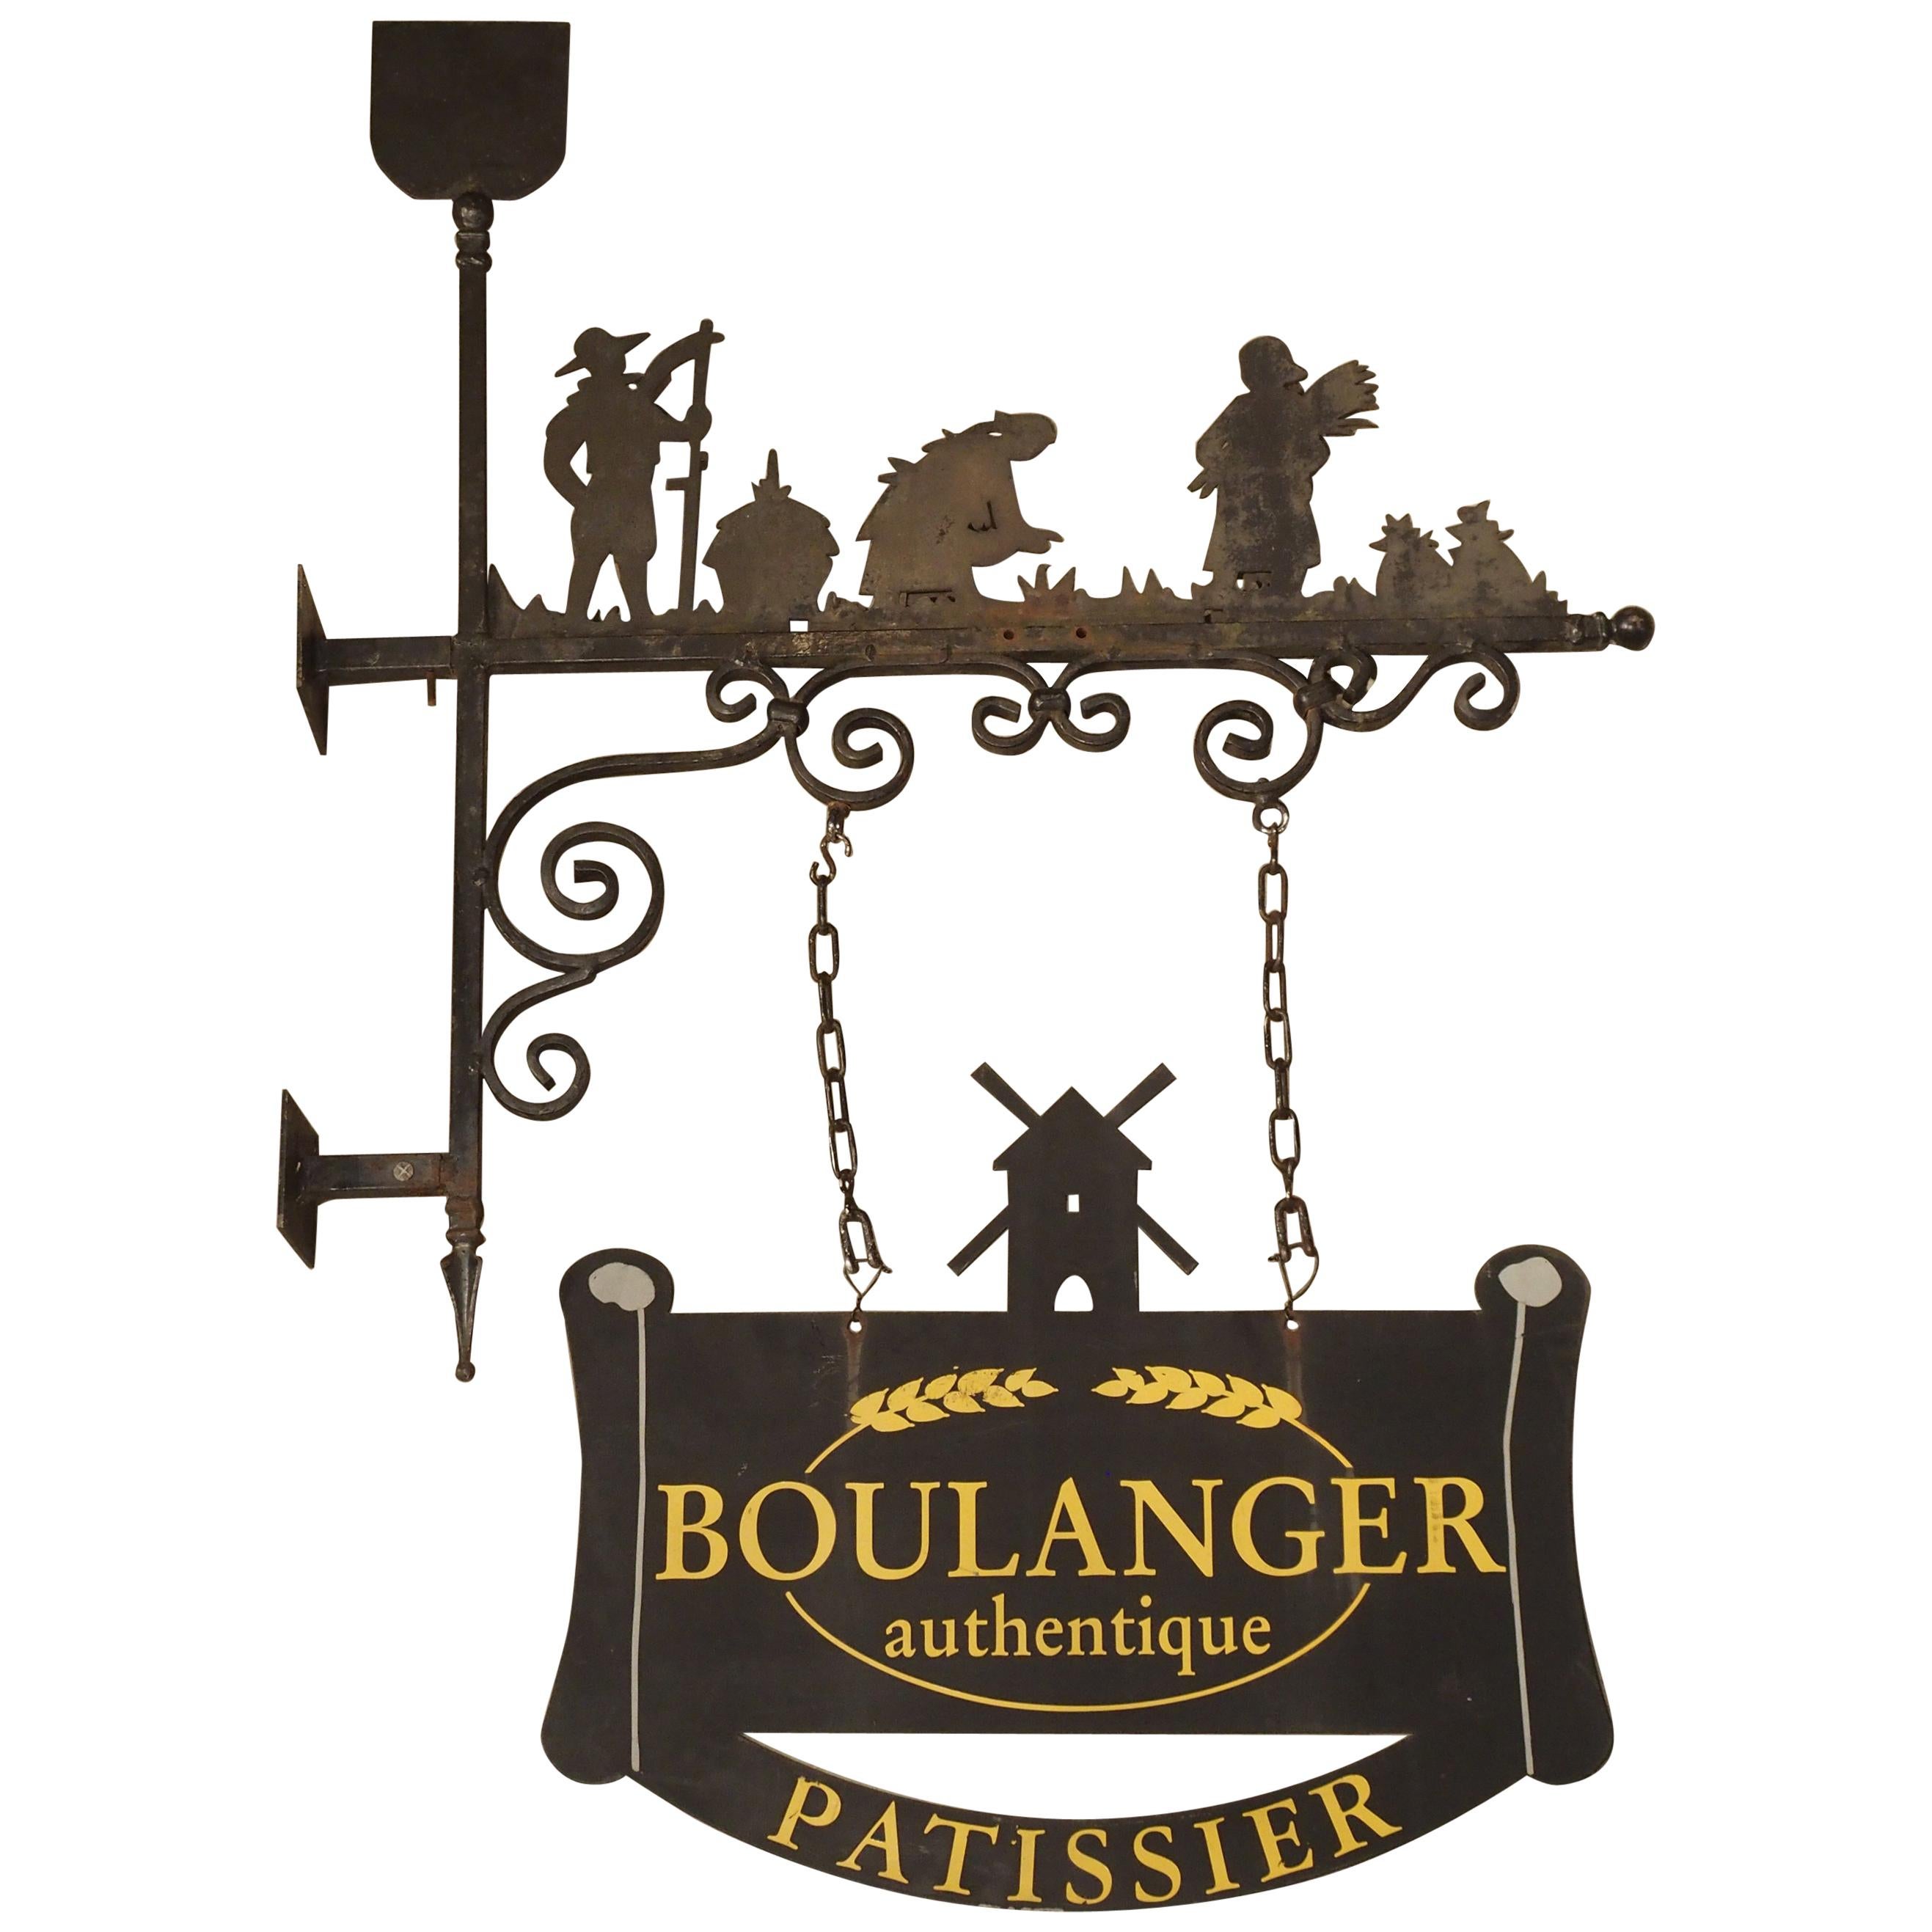 Decorative French Iron Bakery Sign, Boulanger-Patissier, 20th Century